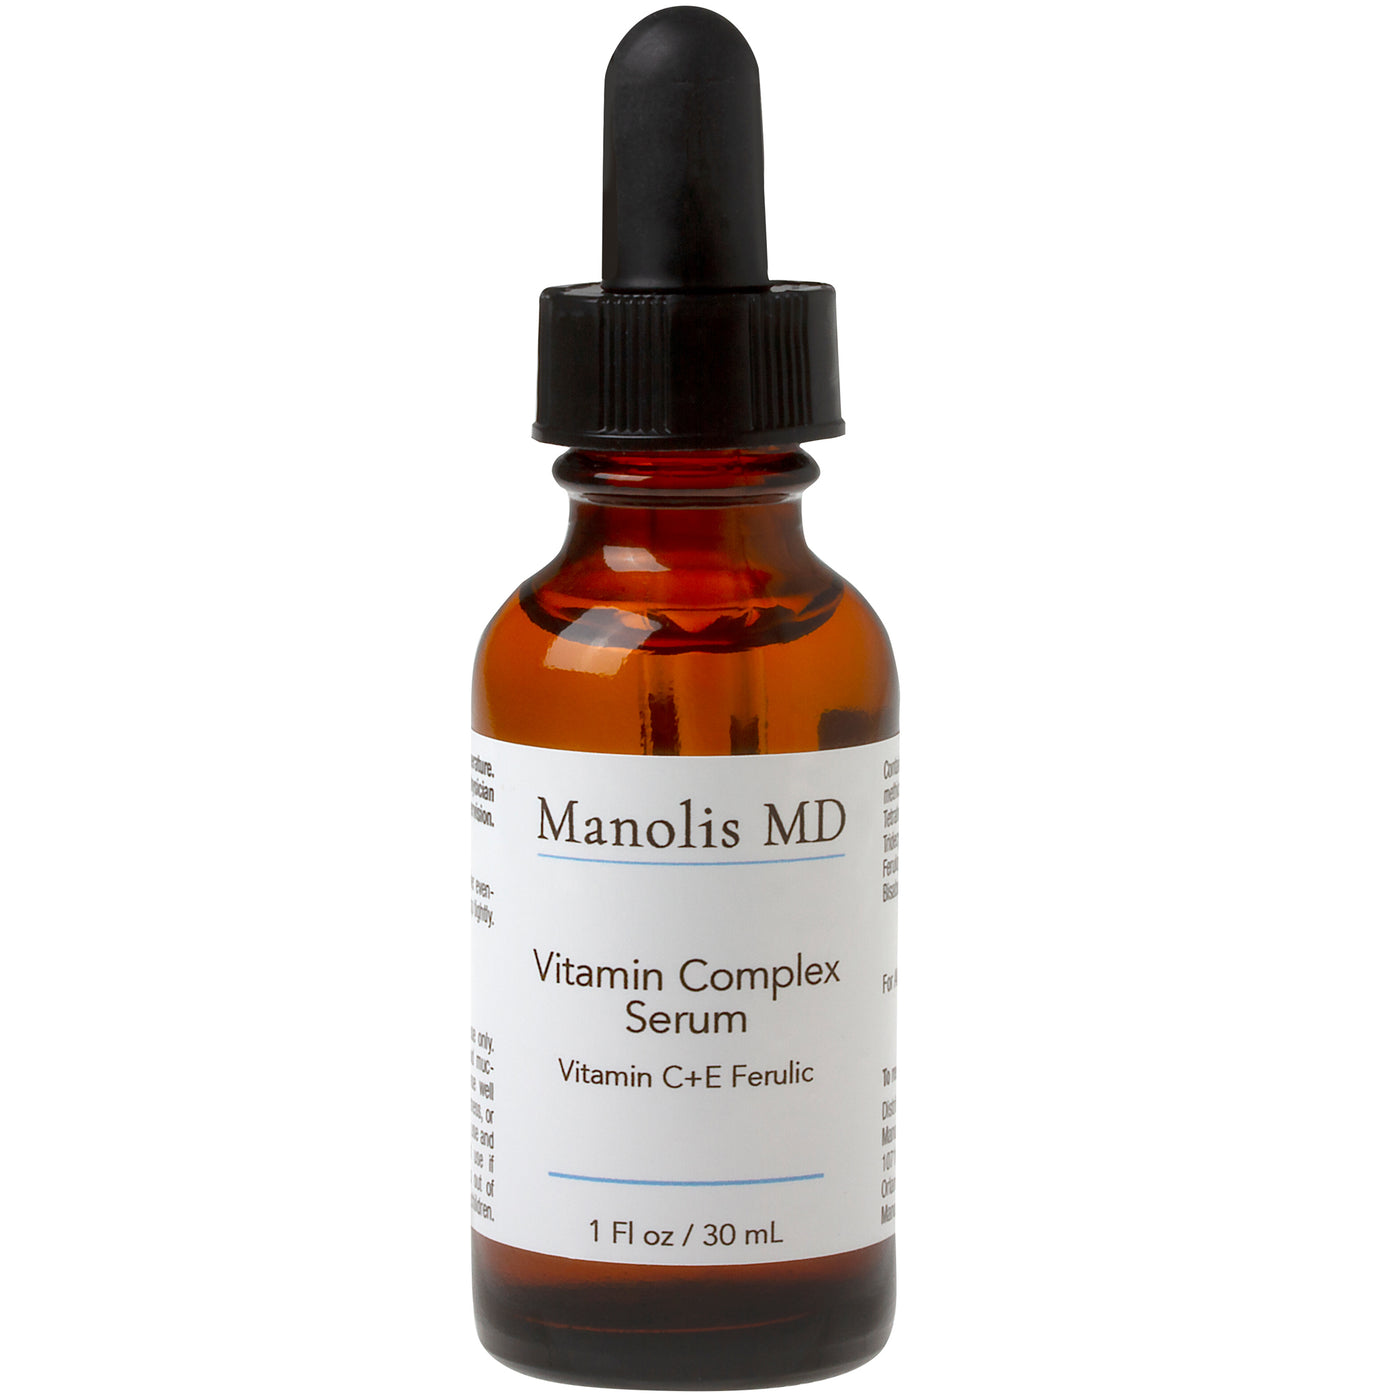 The Vitamin Complex Serum contains a form of Vitamin C, clinically demonstrated to improve skin appearance.